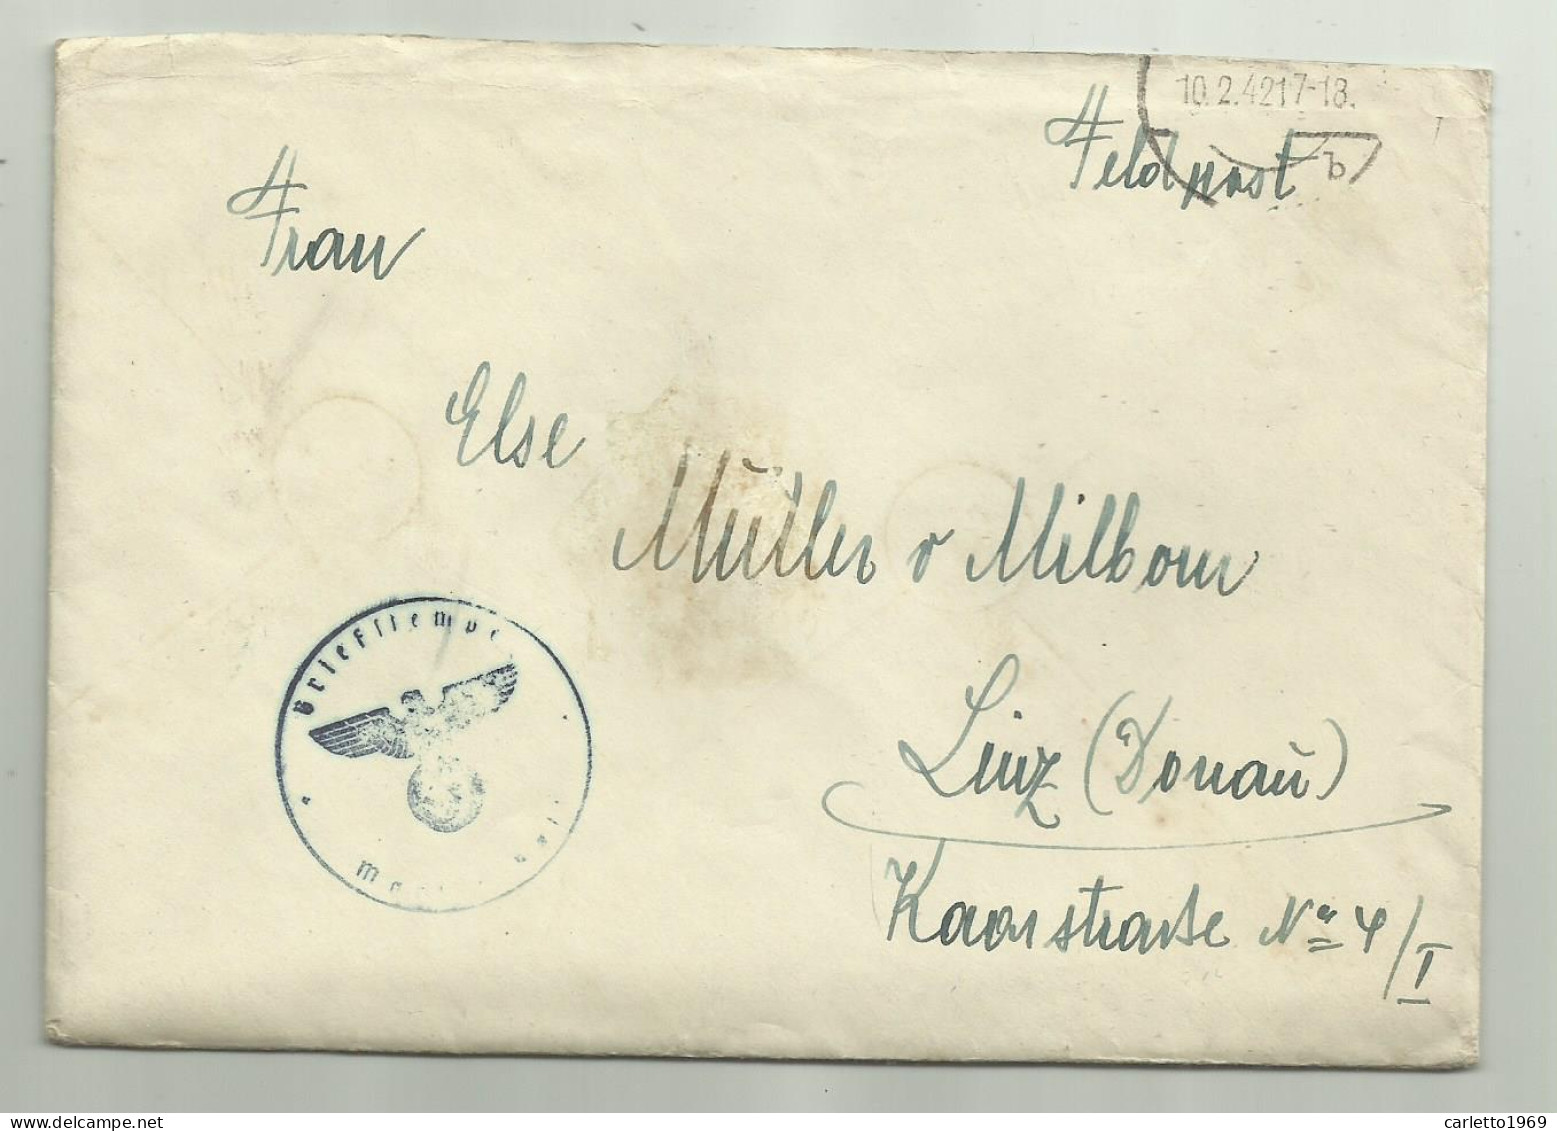 FELDPOST 1942   CON LETTERA  - Used Stamps